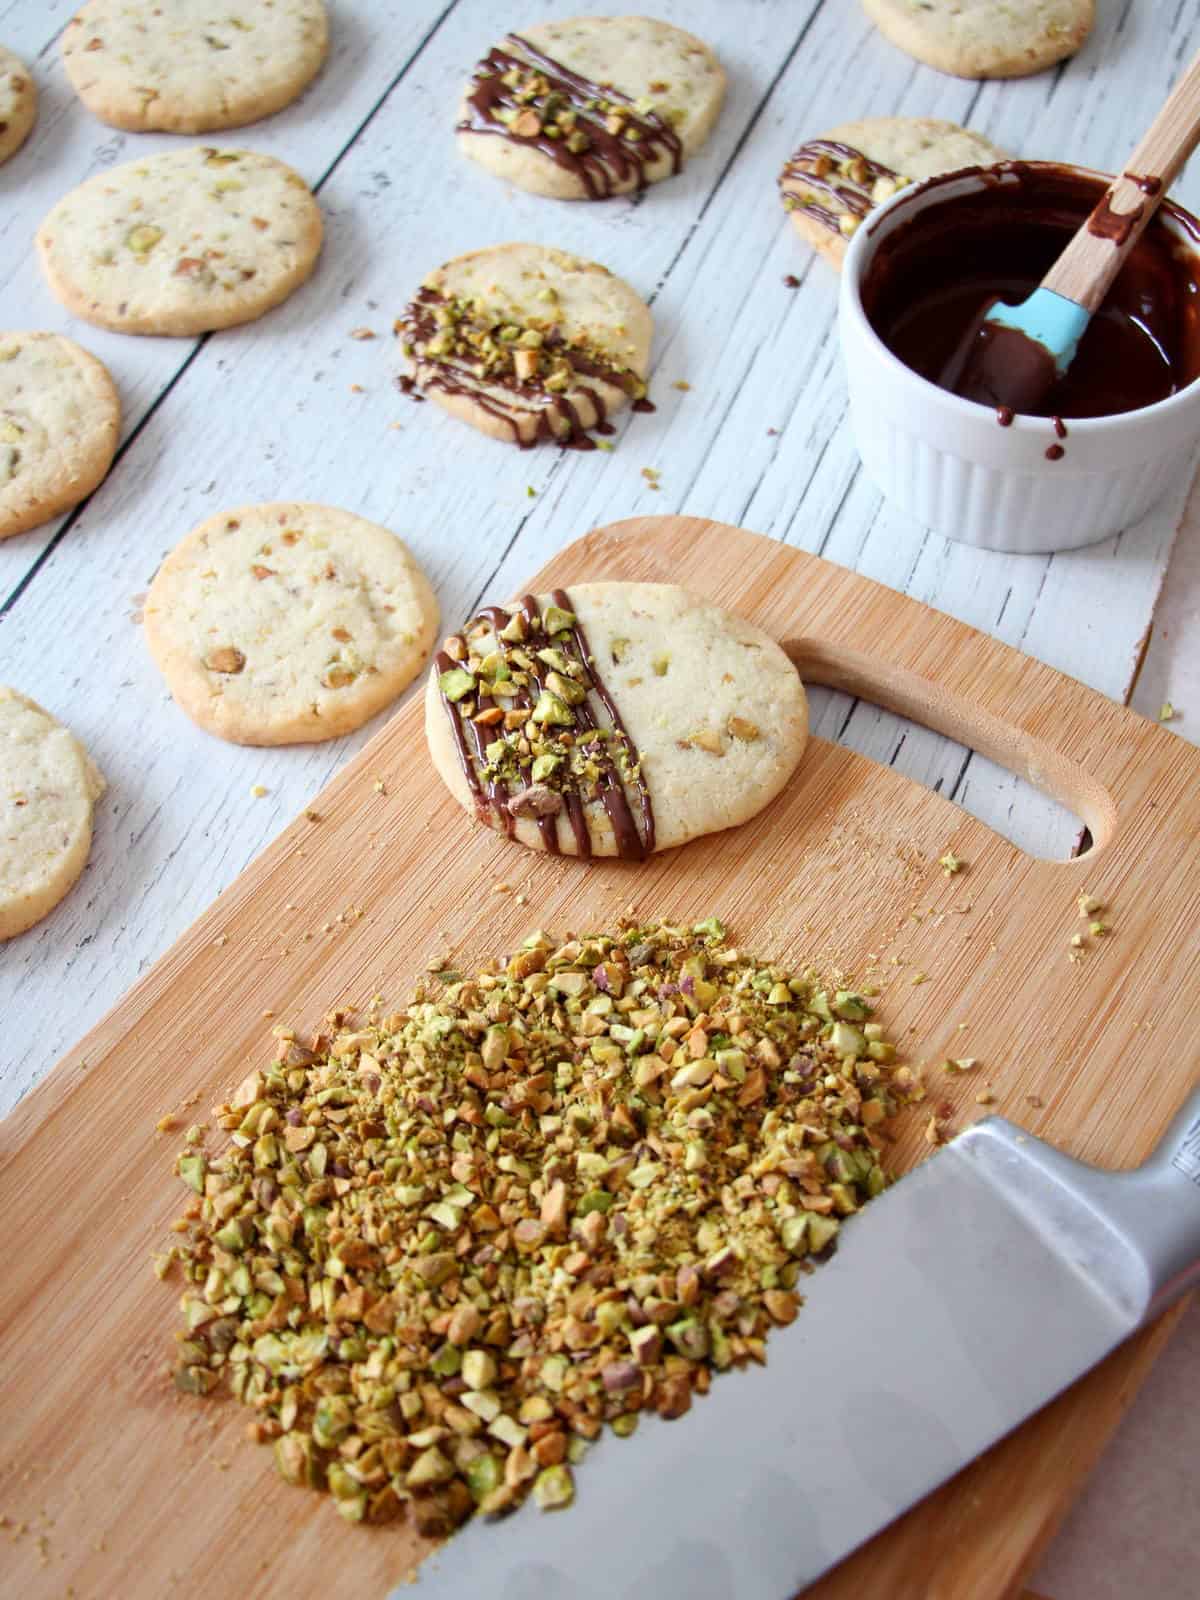 roughly chopped pistachios on wooden board next to shortbrad cookies